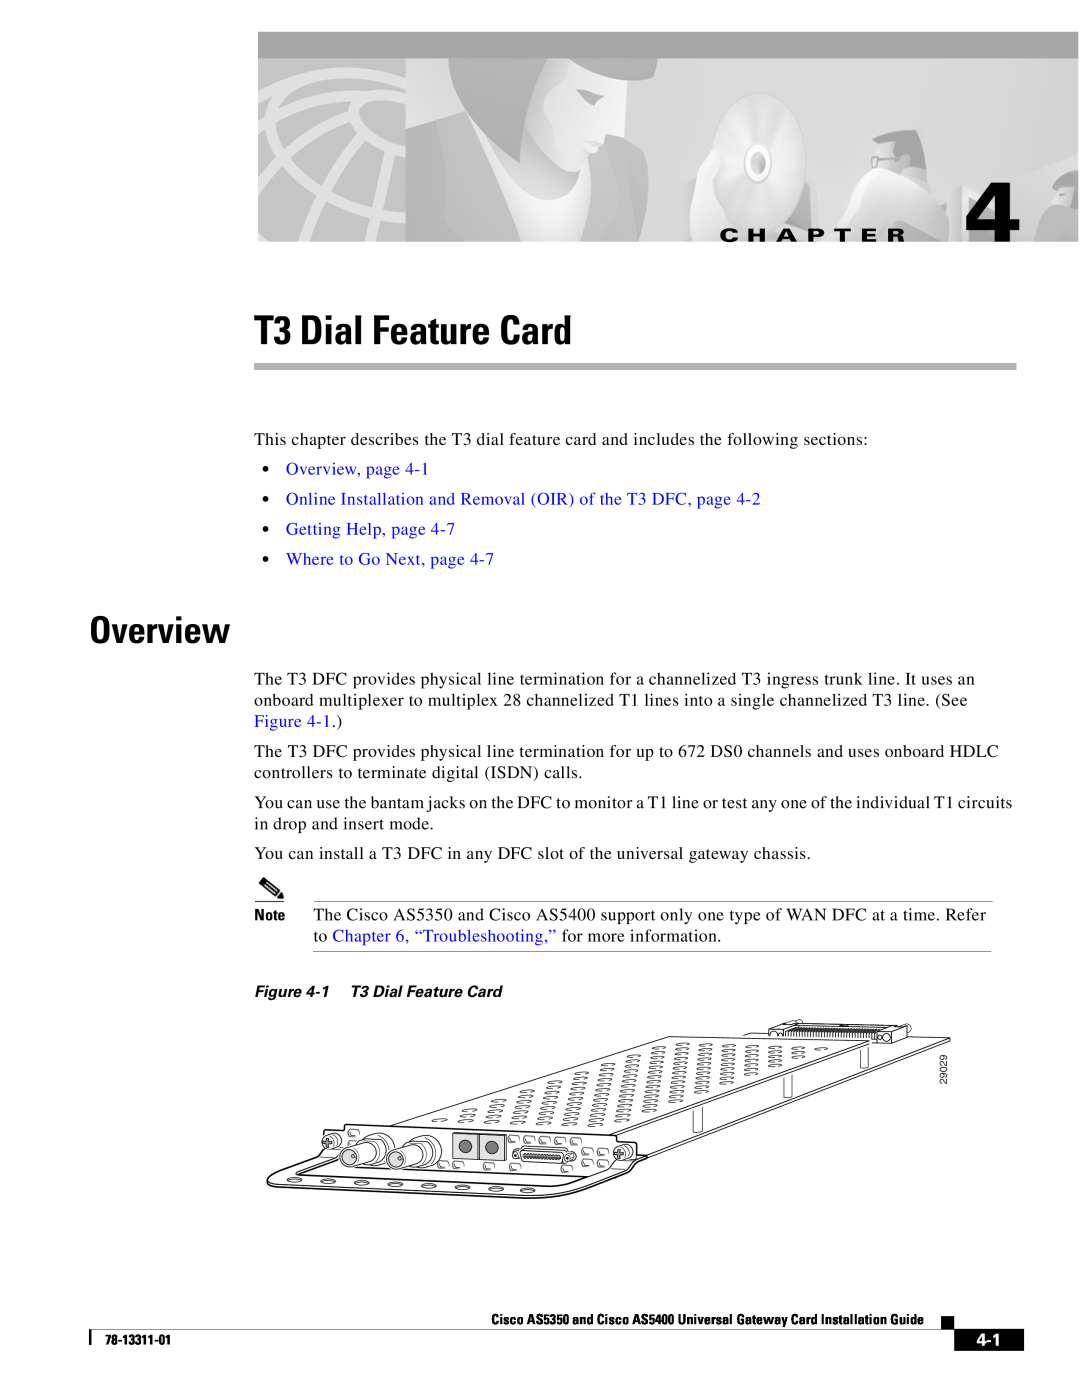 Cisco Systems AS5350, AS5400 manual T3 Dial Feature Card, Online Installation and Removal OIR of the T3 DFC, page, Overview 